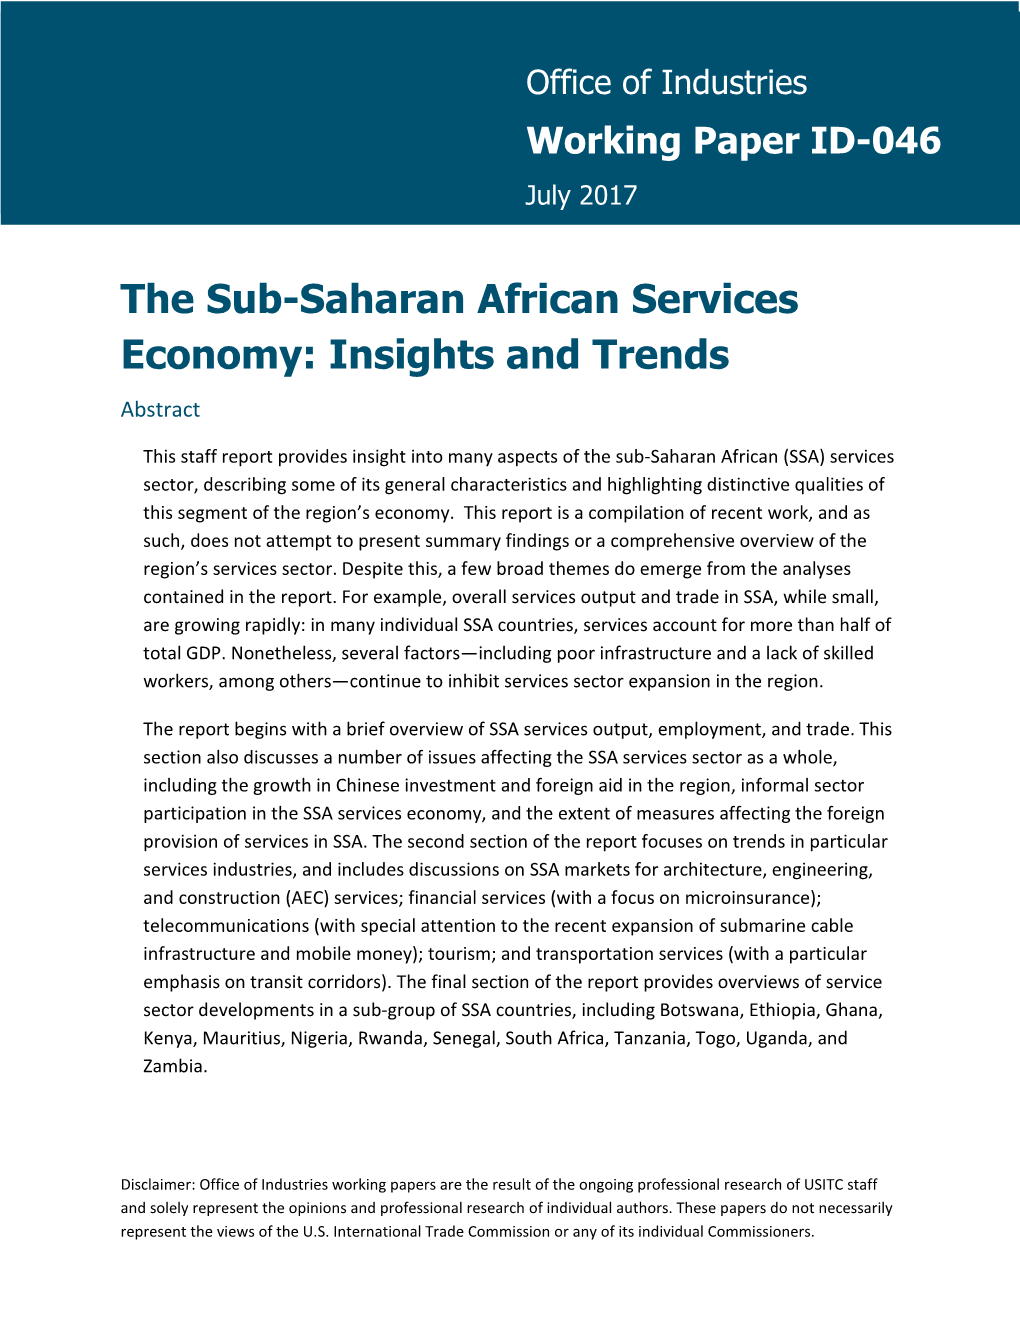 Sub-Saharan African Services Economy: Insights and Trends Abstract